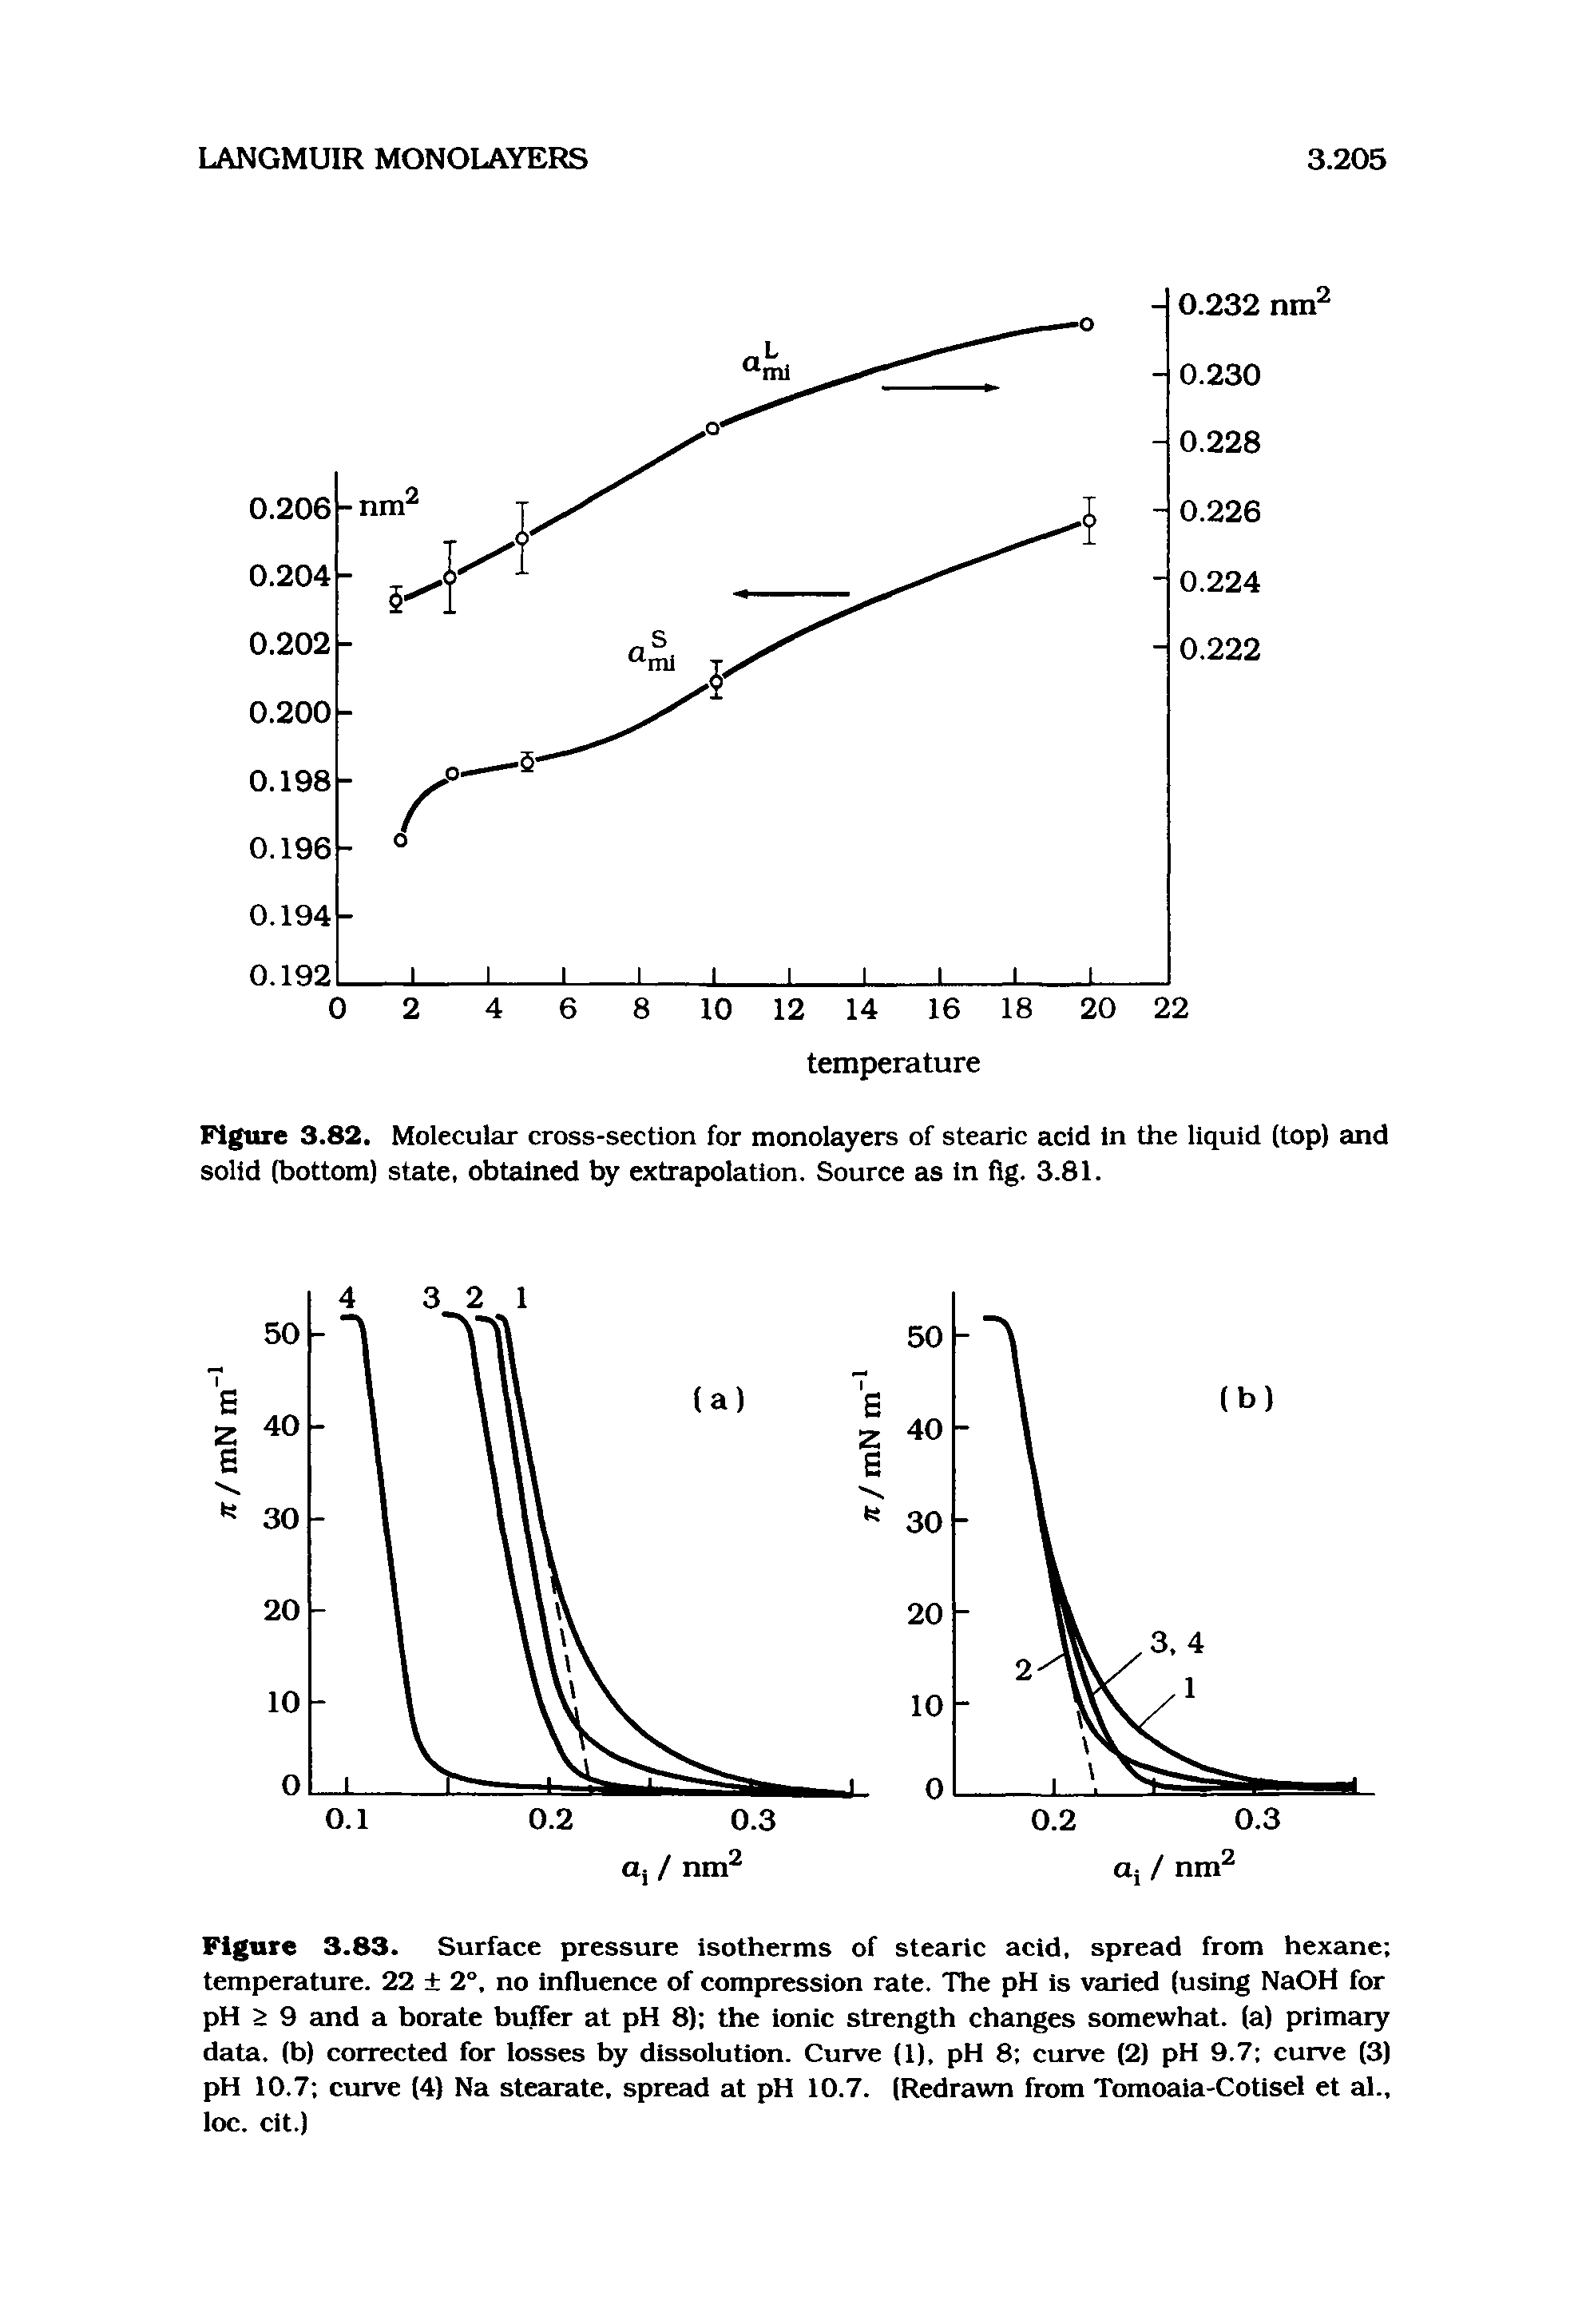 Figure 3.83. Surface pressure isotherms of stearic acid, spread from hexane temperature. 22 + 2°, no influence of compression rate. The pH is varied (using NaOM for pH > 9 and a borate buffer at pH 8) the ionic strength changes somewhat, (a) primary data, (b) corrected for losses by dissolution. Curve (1), pH 8 curve (2) pH 9.7 curve (3) pH 10.7 curve (4) Na stearate, spread at pH 10.7. (Redrawn from Tomoaia-Cotisel et al., loc. cit.)...